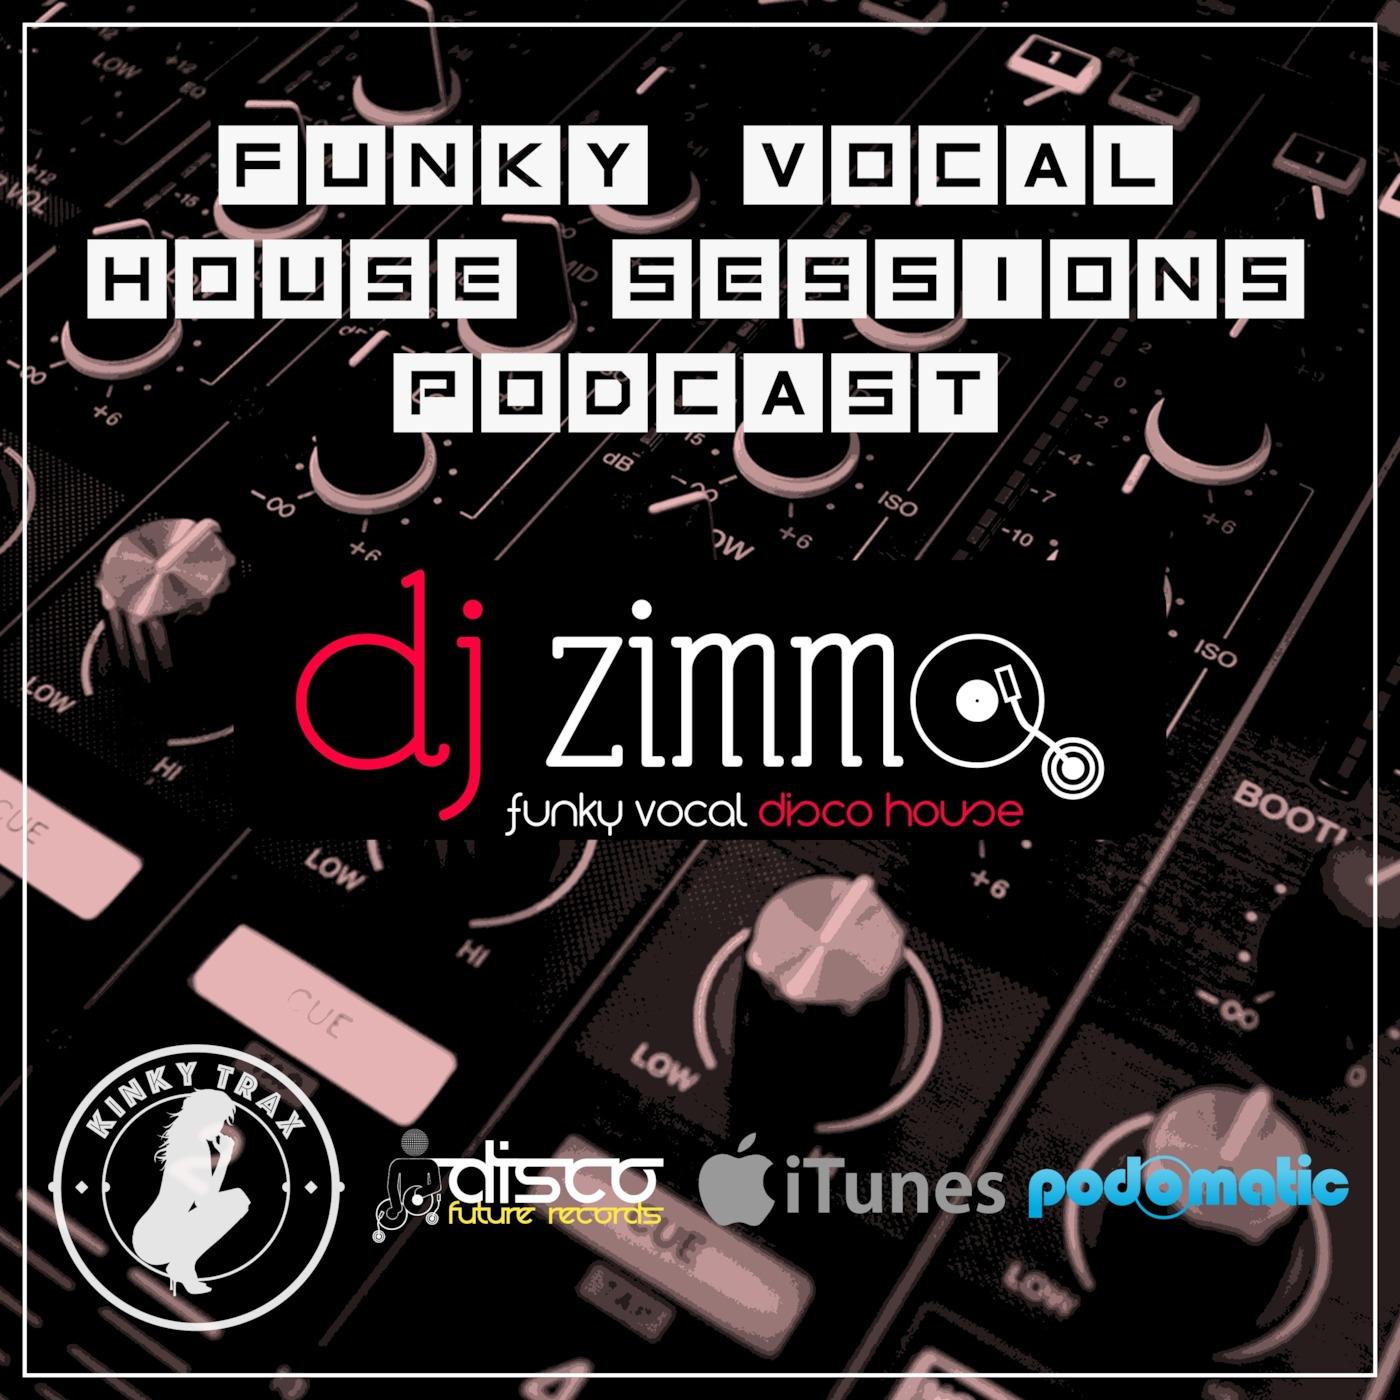 Funky Vocal House Sessions